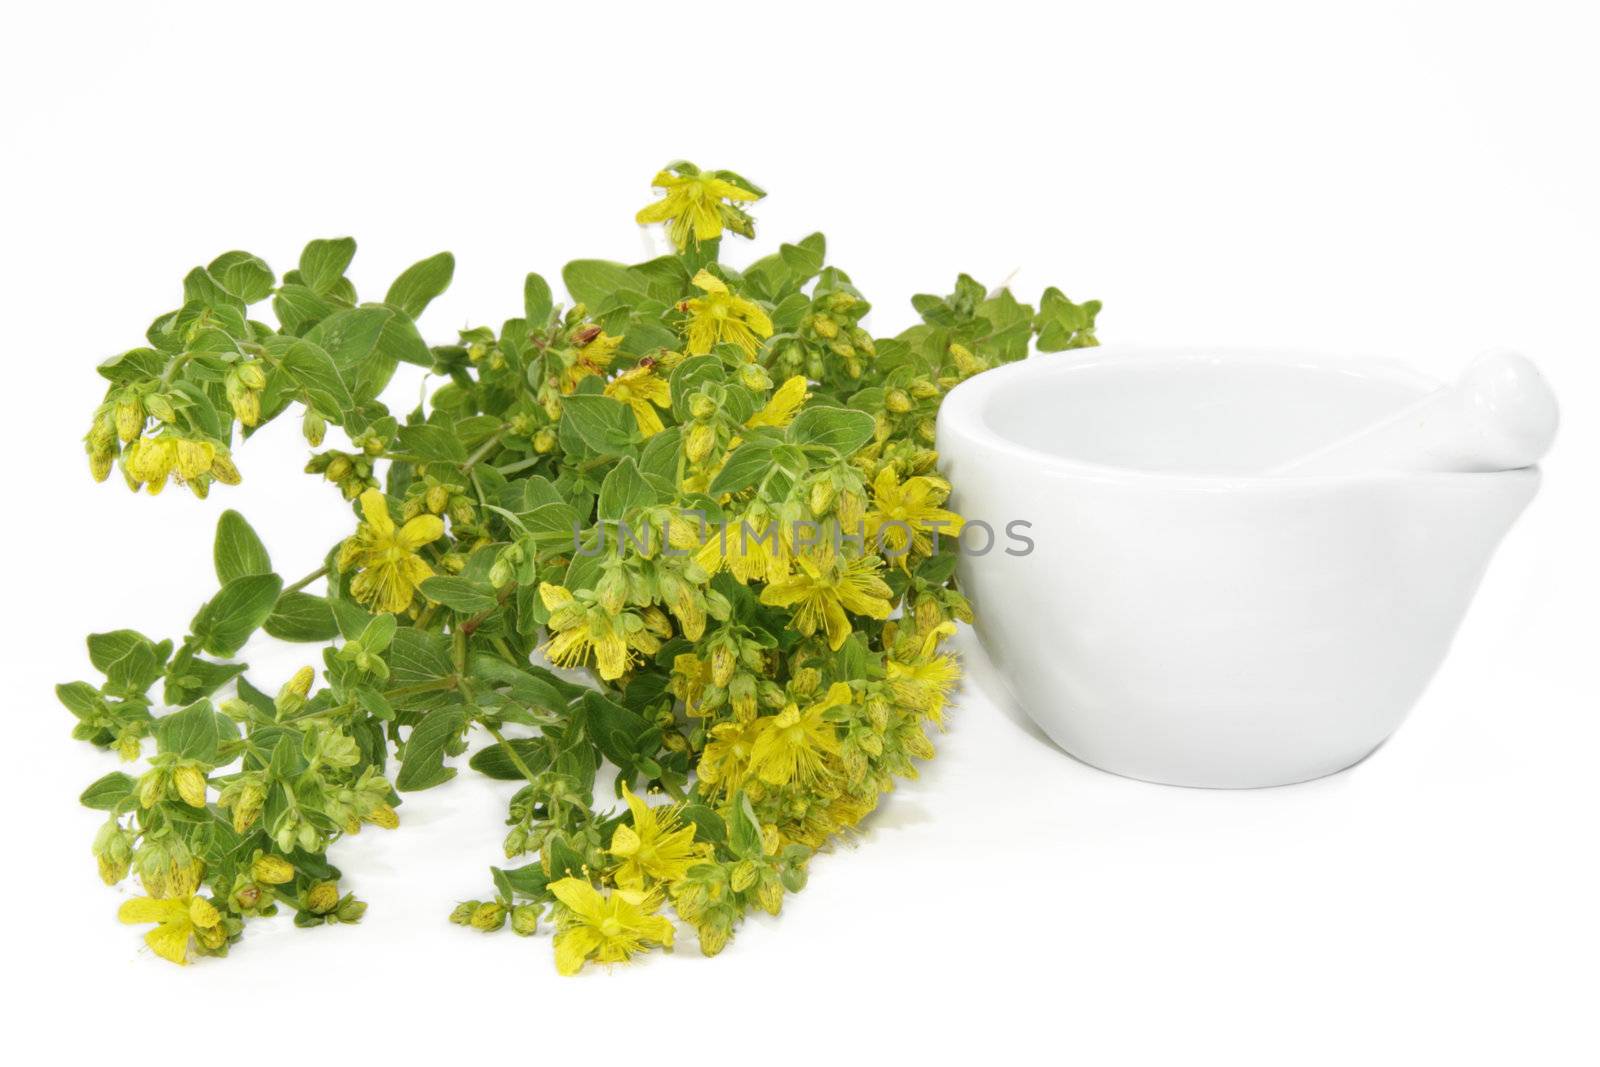 Saint-John's wort with mortar over white background